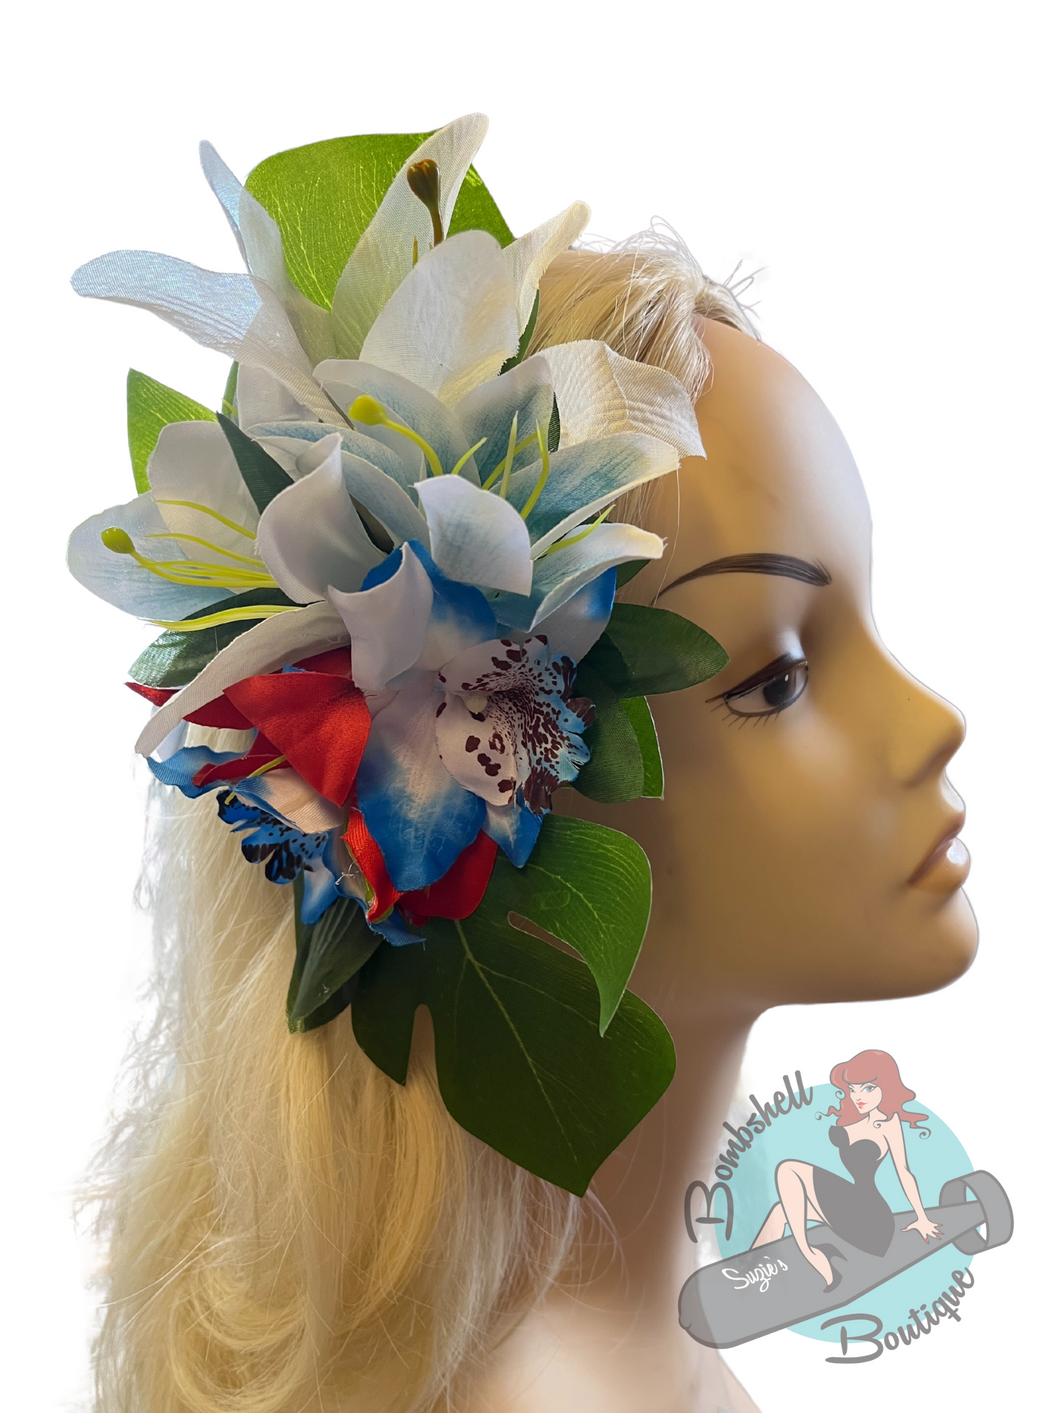 Rockabilly pinup hair flower clip. Perfect for completing a pinup hairstyle and tiki outfit. The flowers are tropical hibiscus in blue red and white set on a banana leaf and affixed to a hair clip.